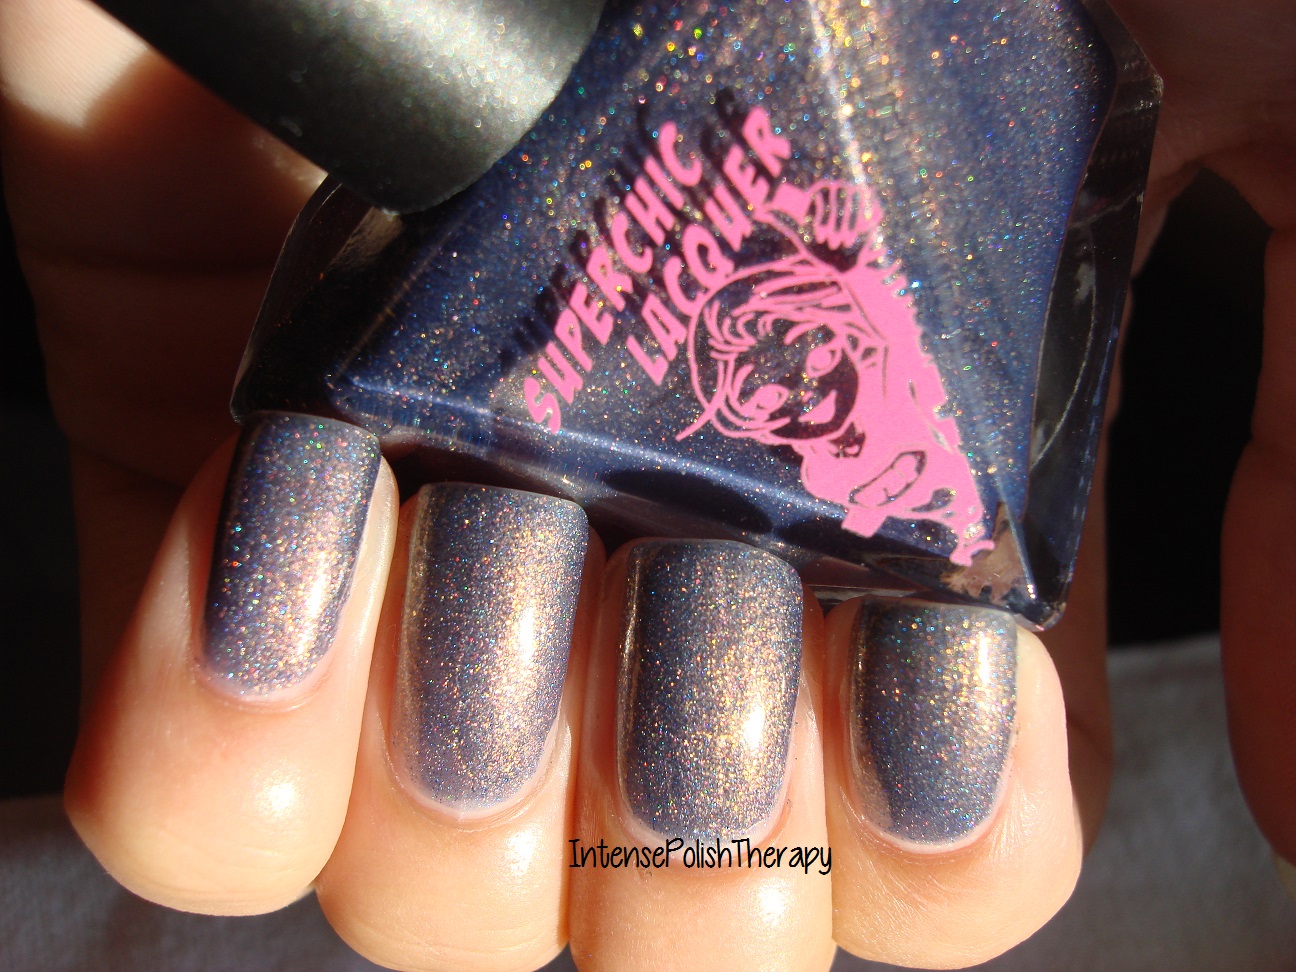 Superchic Lacquer - Baker's Hunger For A Bun In The Oven